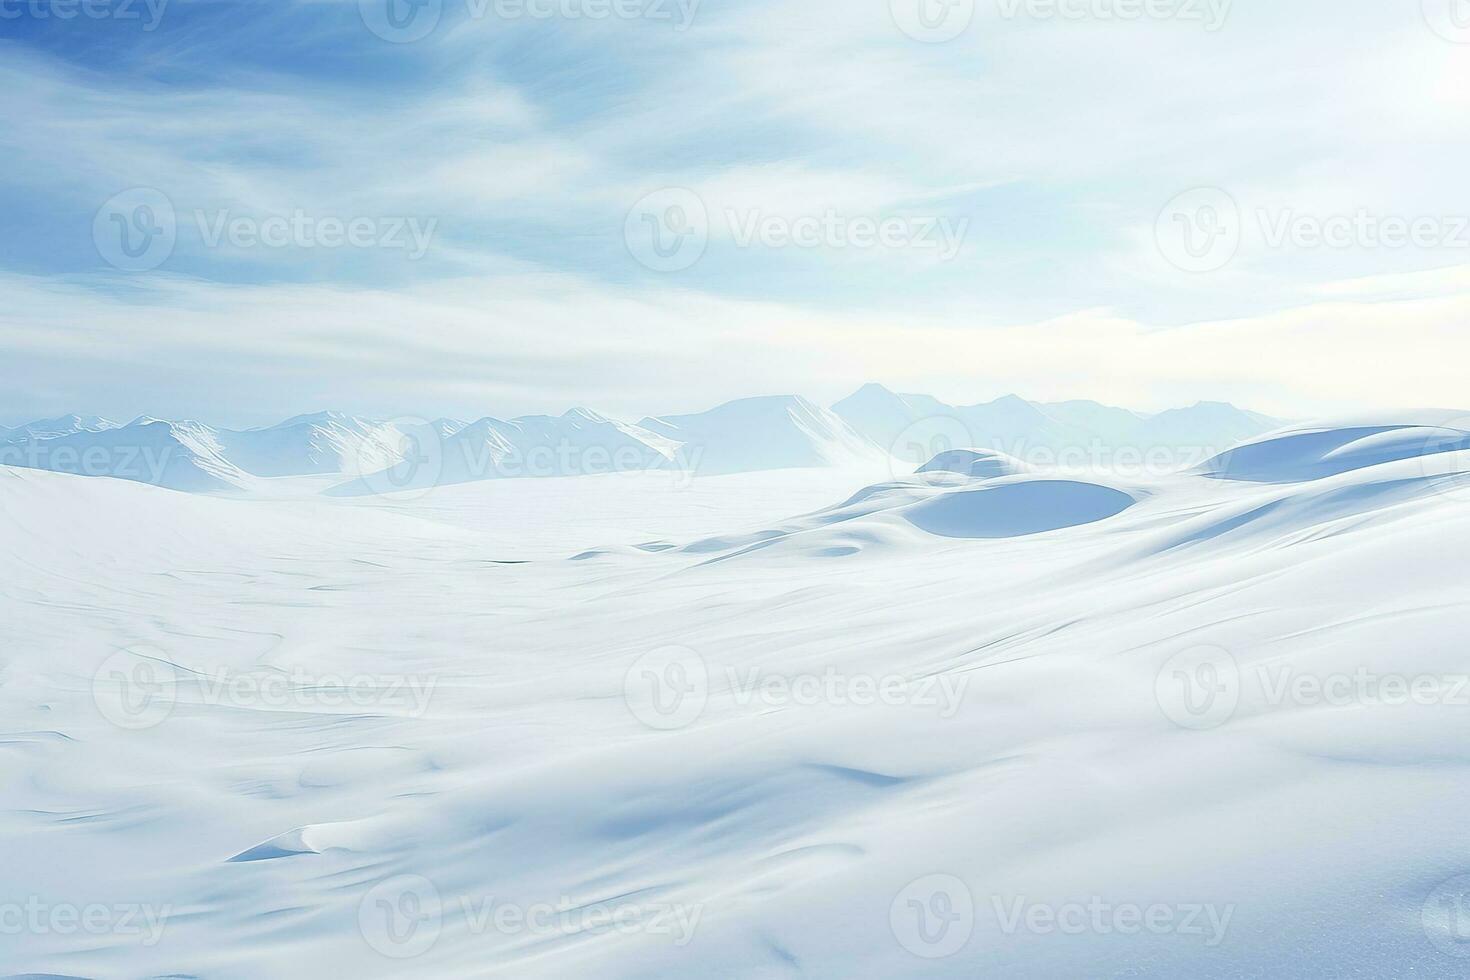 Norway's minimalistic snowdrift landscape is beautiful clean light high key and decorative photo